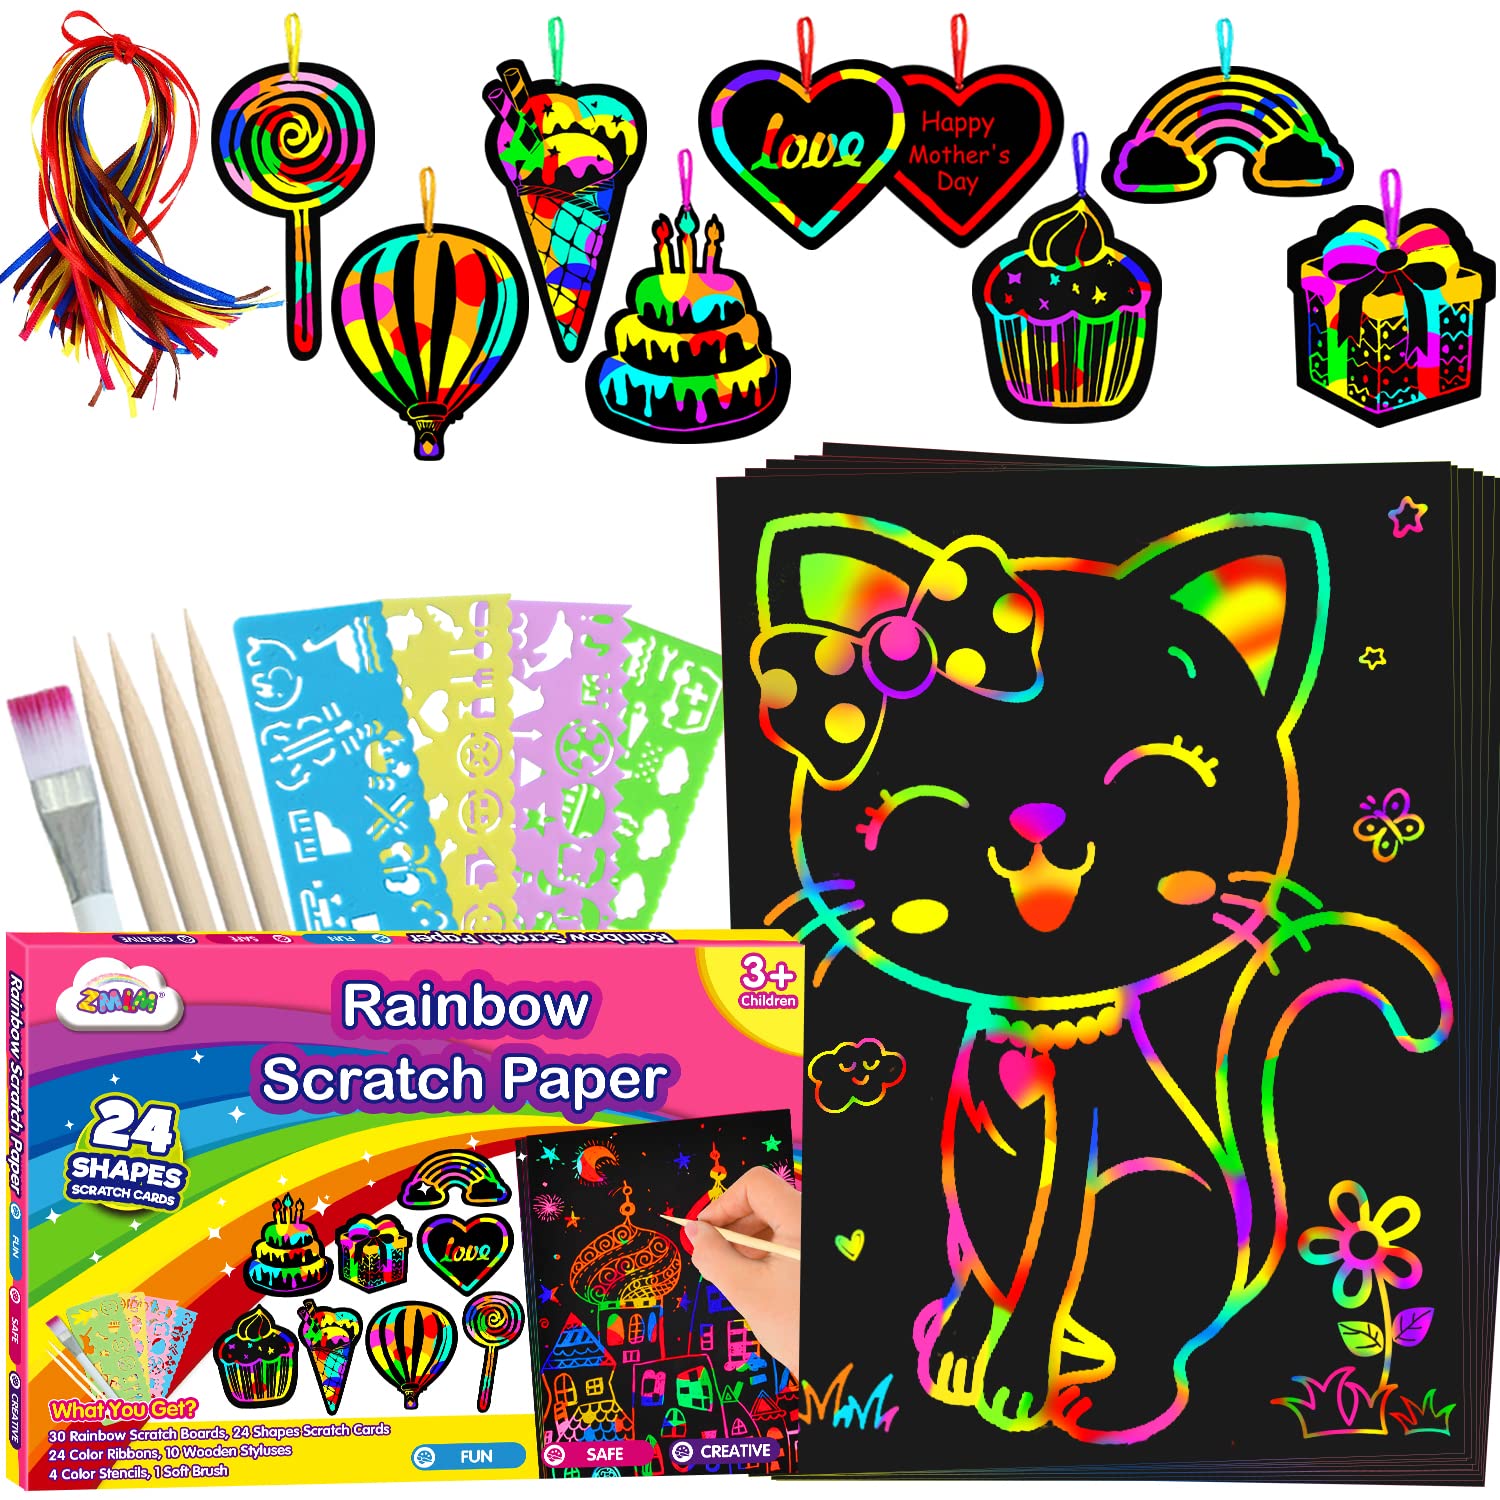 ZMLM Scratch Paper Art-Craft Christmas Girl: Rainbow Scratch Magic Drawing Set Paper Pad Board Supply Kit Girl Project Activity for 3-12 Age Kid Game Toy Holiday|Party |Birthday|Children's Day Gift